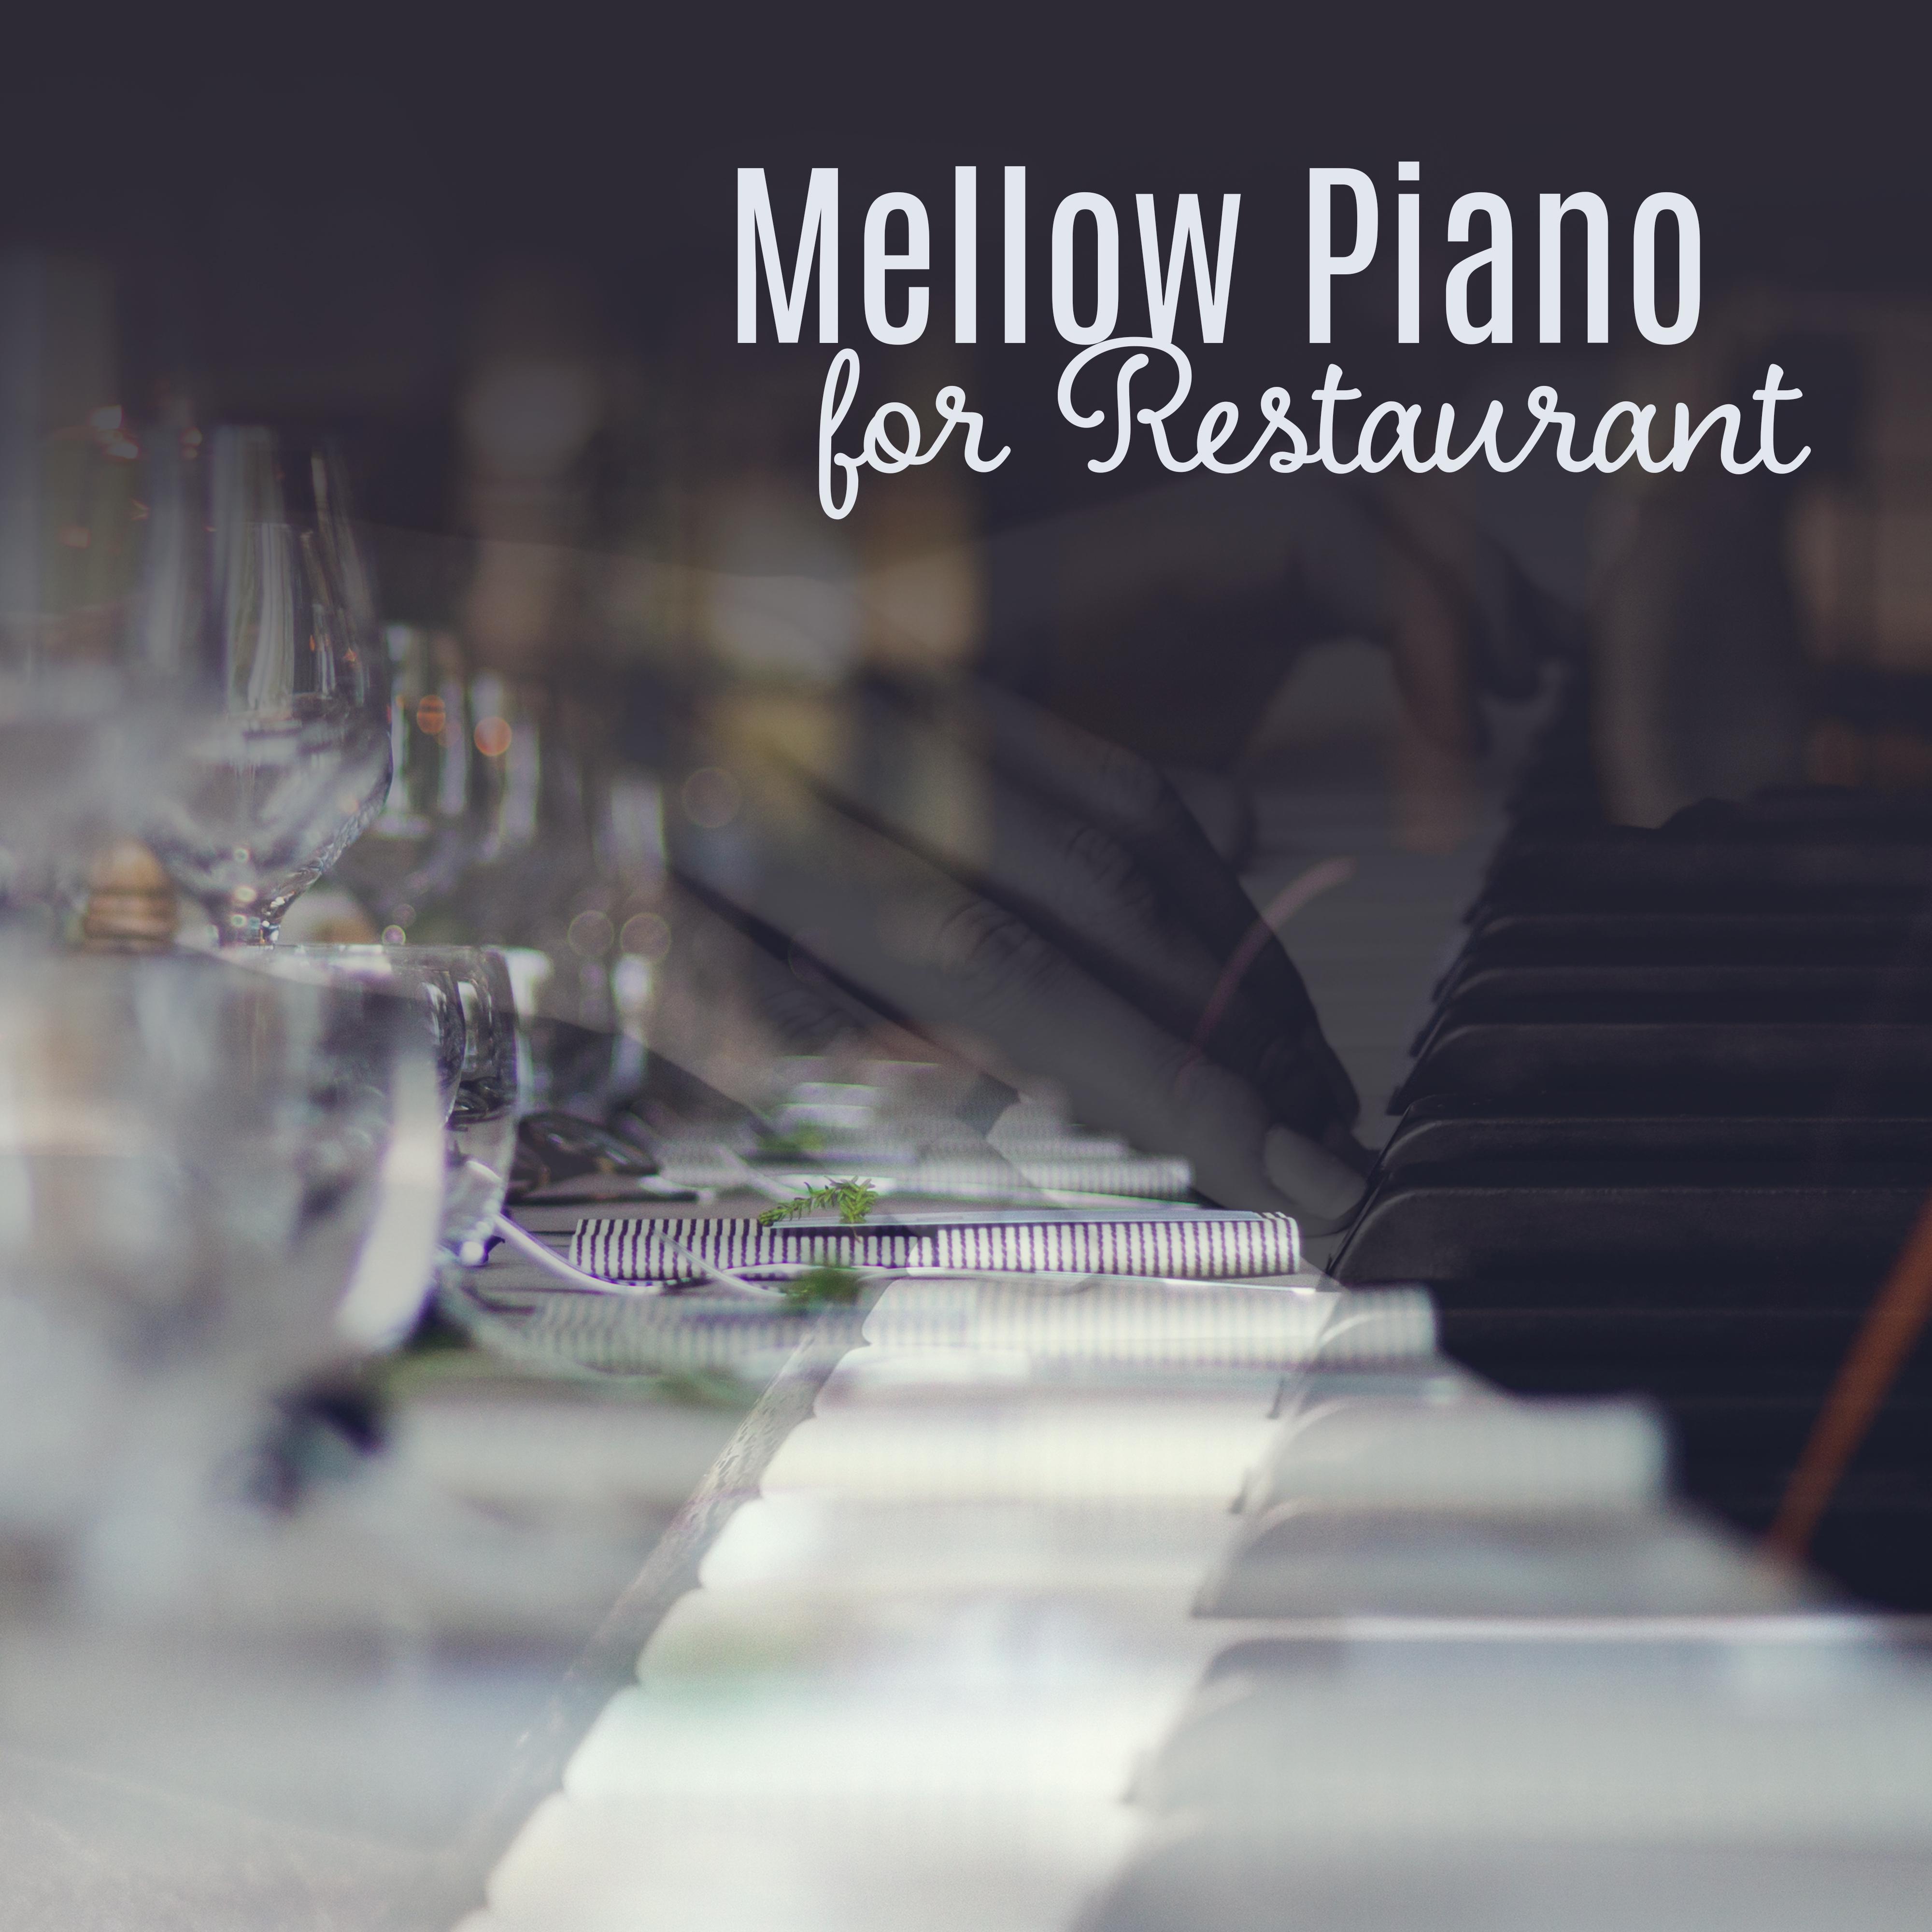 Mellow Piano for Restaurant  Instrumental Music, Smooth Jazz, Sweet Piano Sounds, Music for Restaurant  Cafe